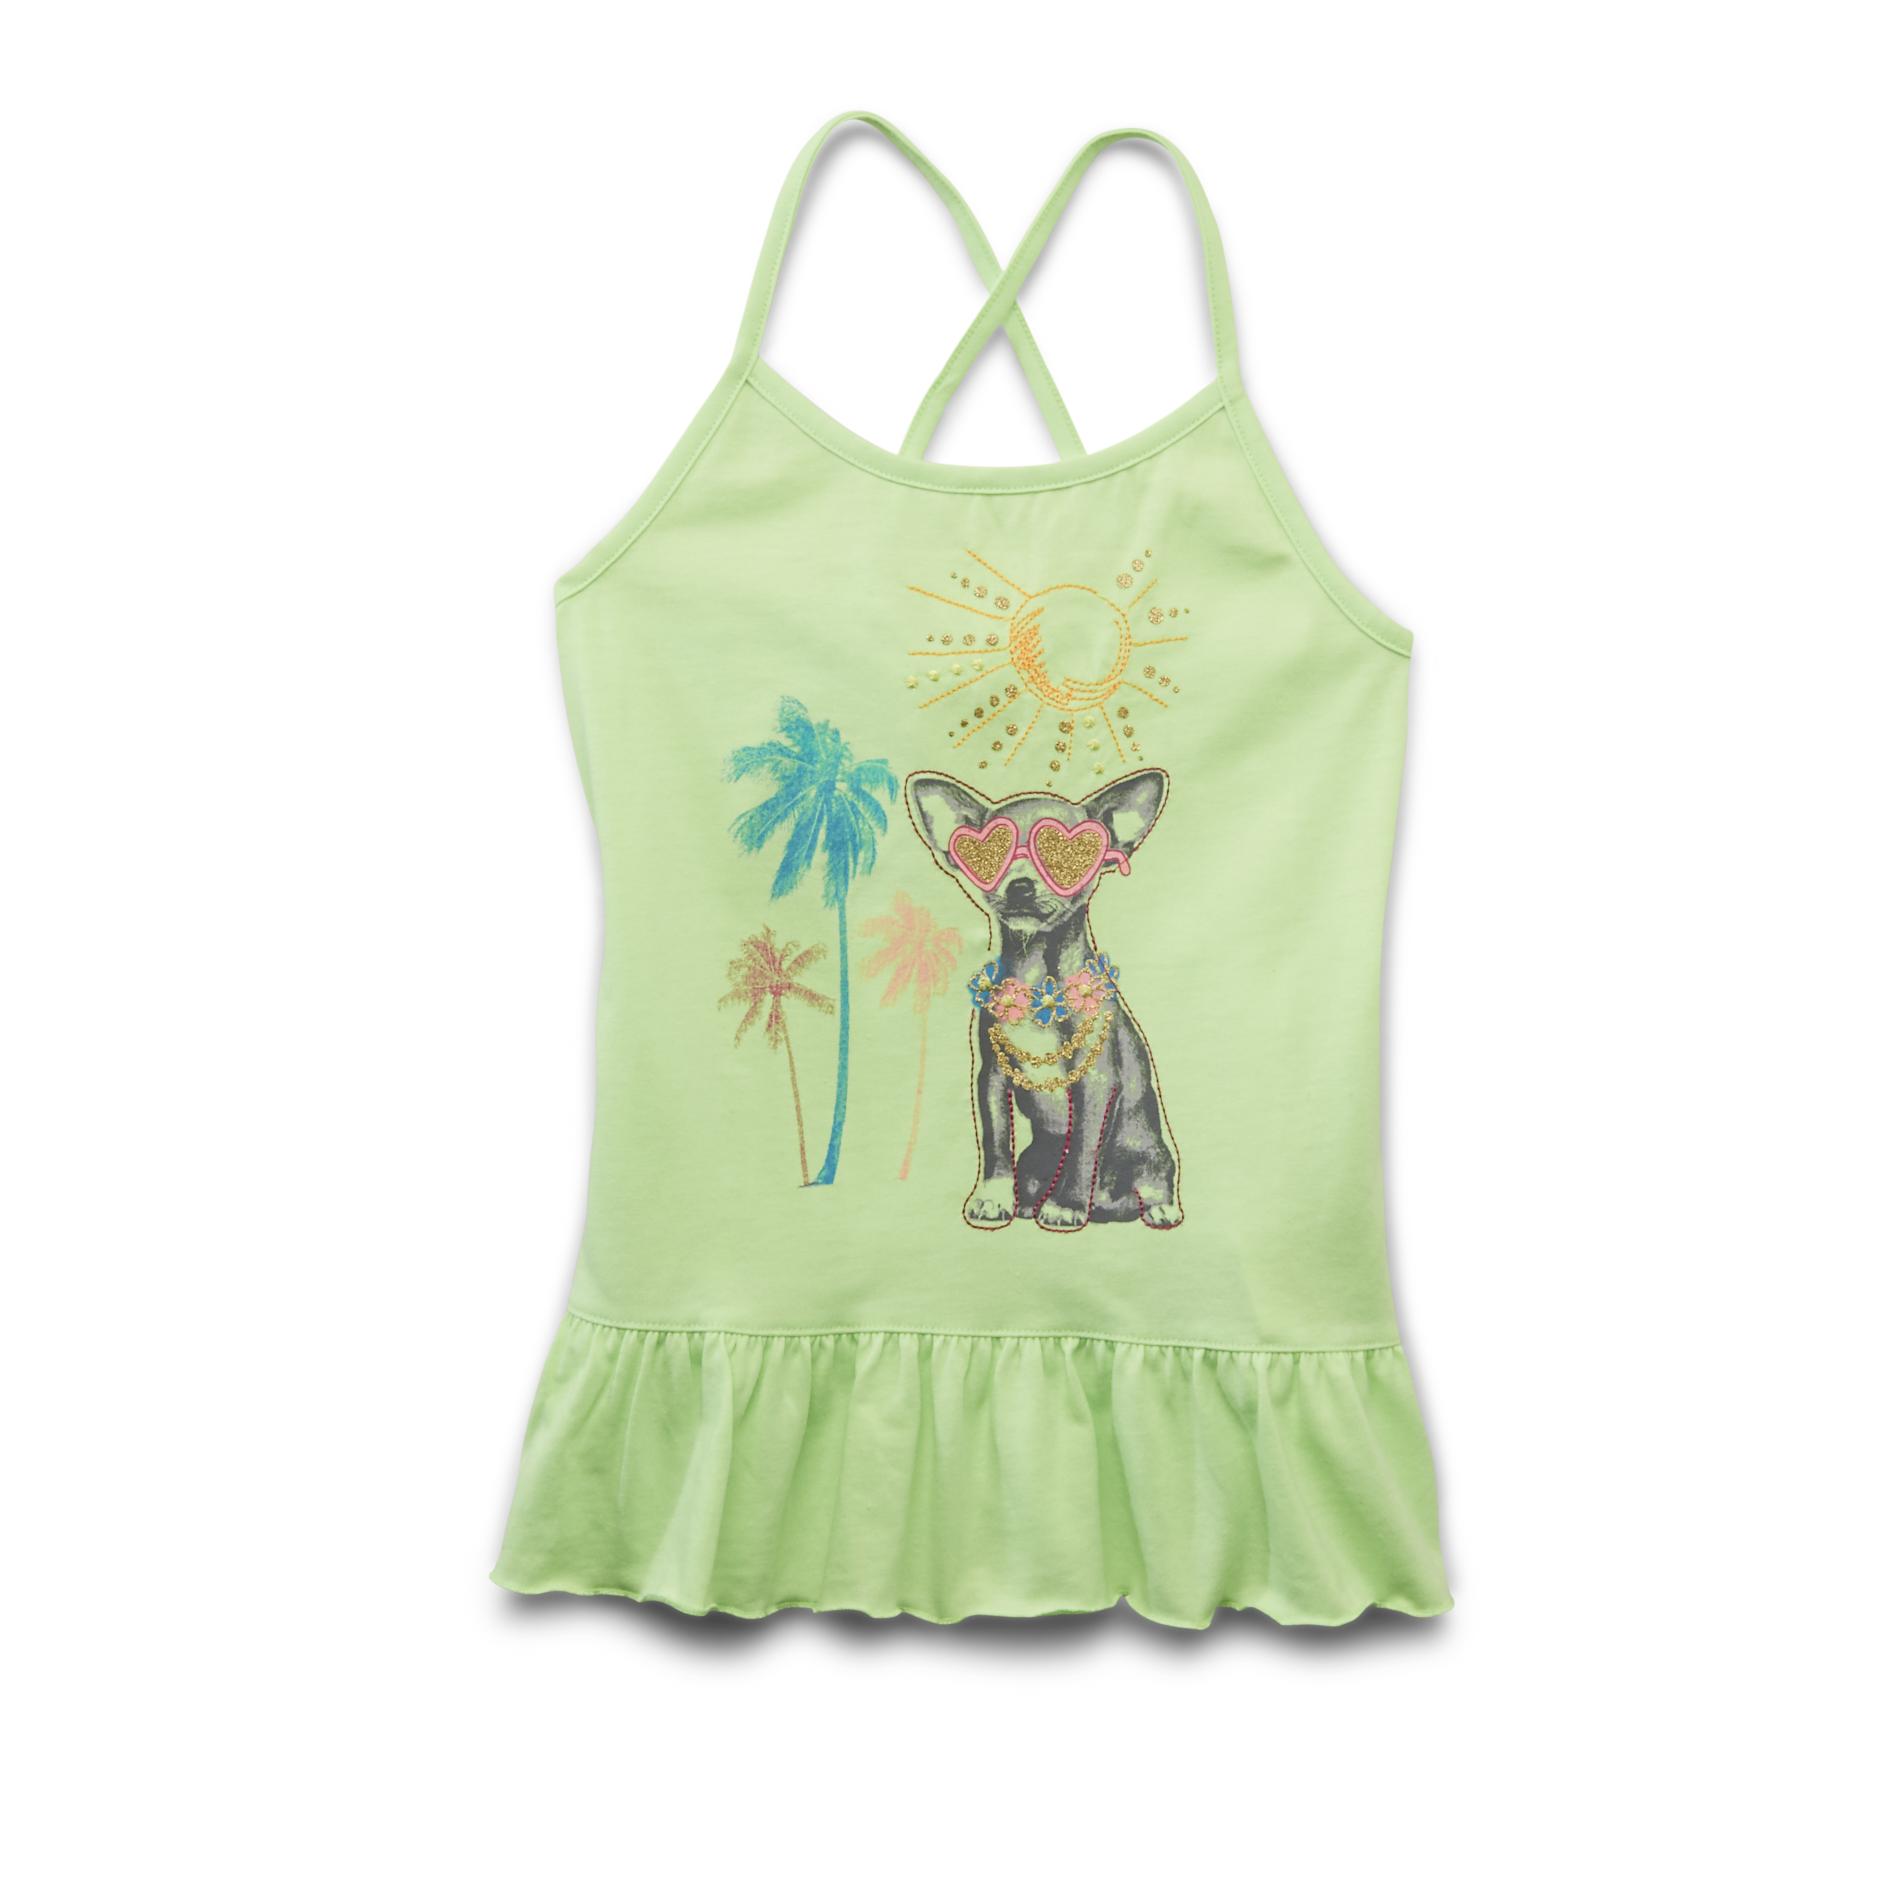 Toughskins Girl's Strappy Tank Top - Chihuahua Puppy